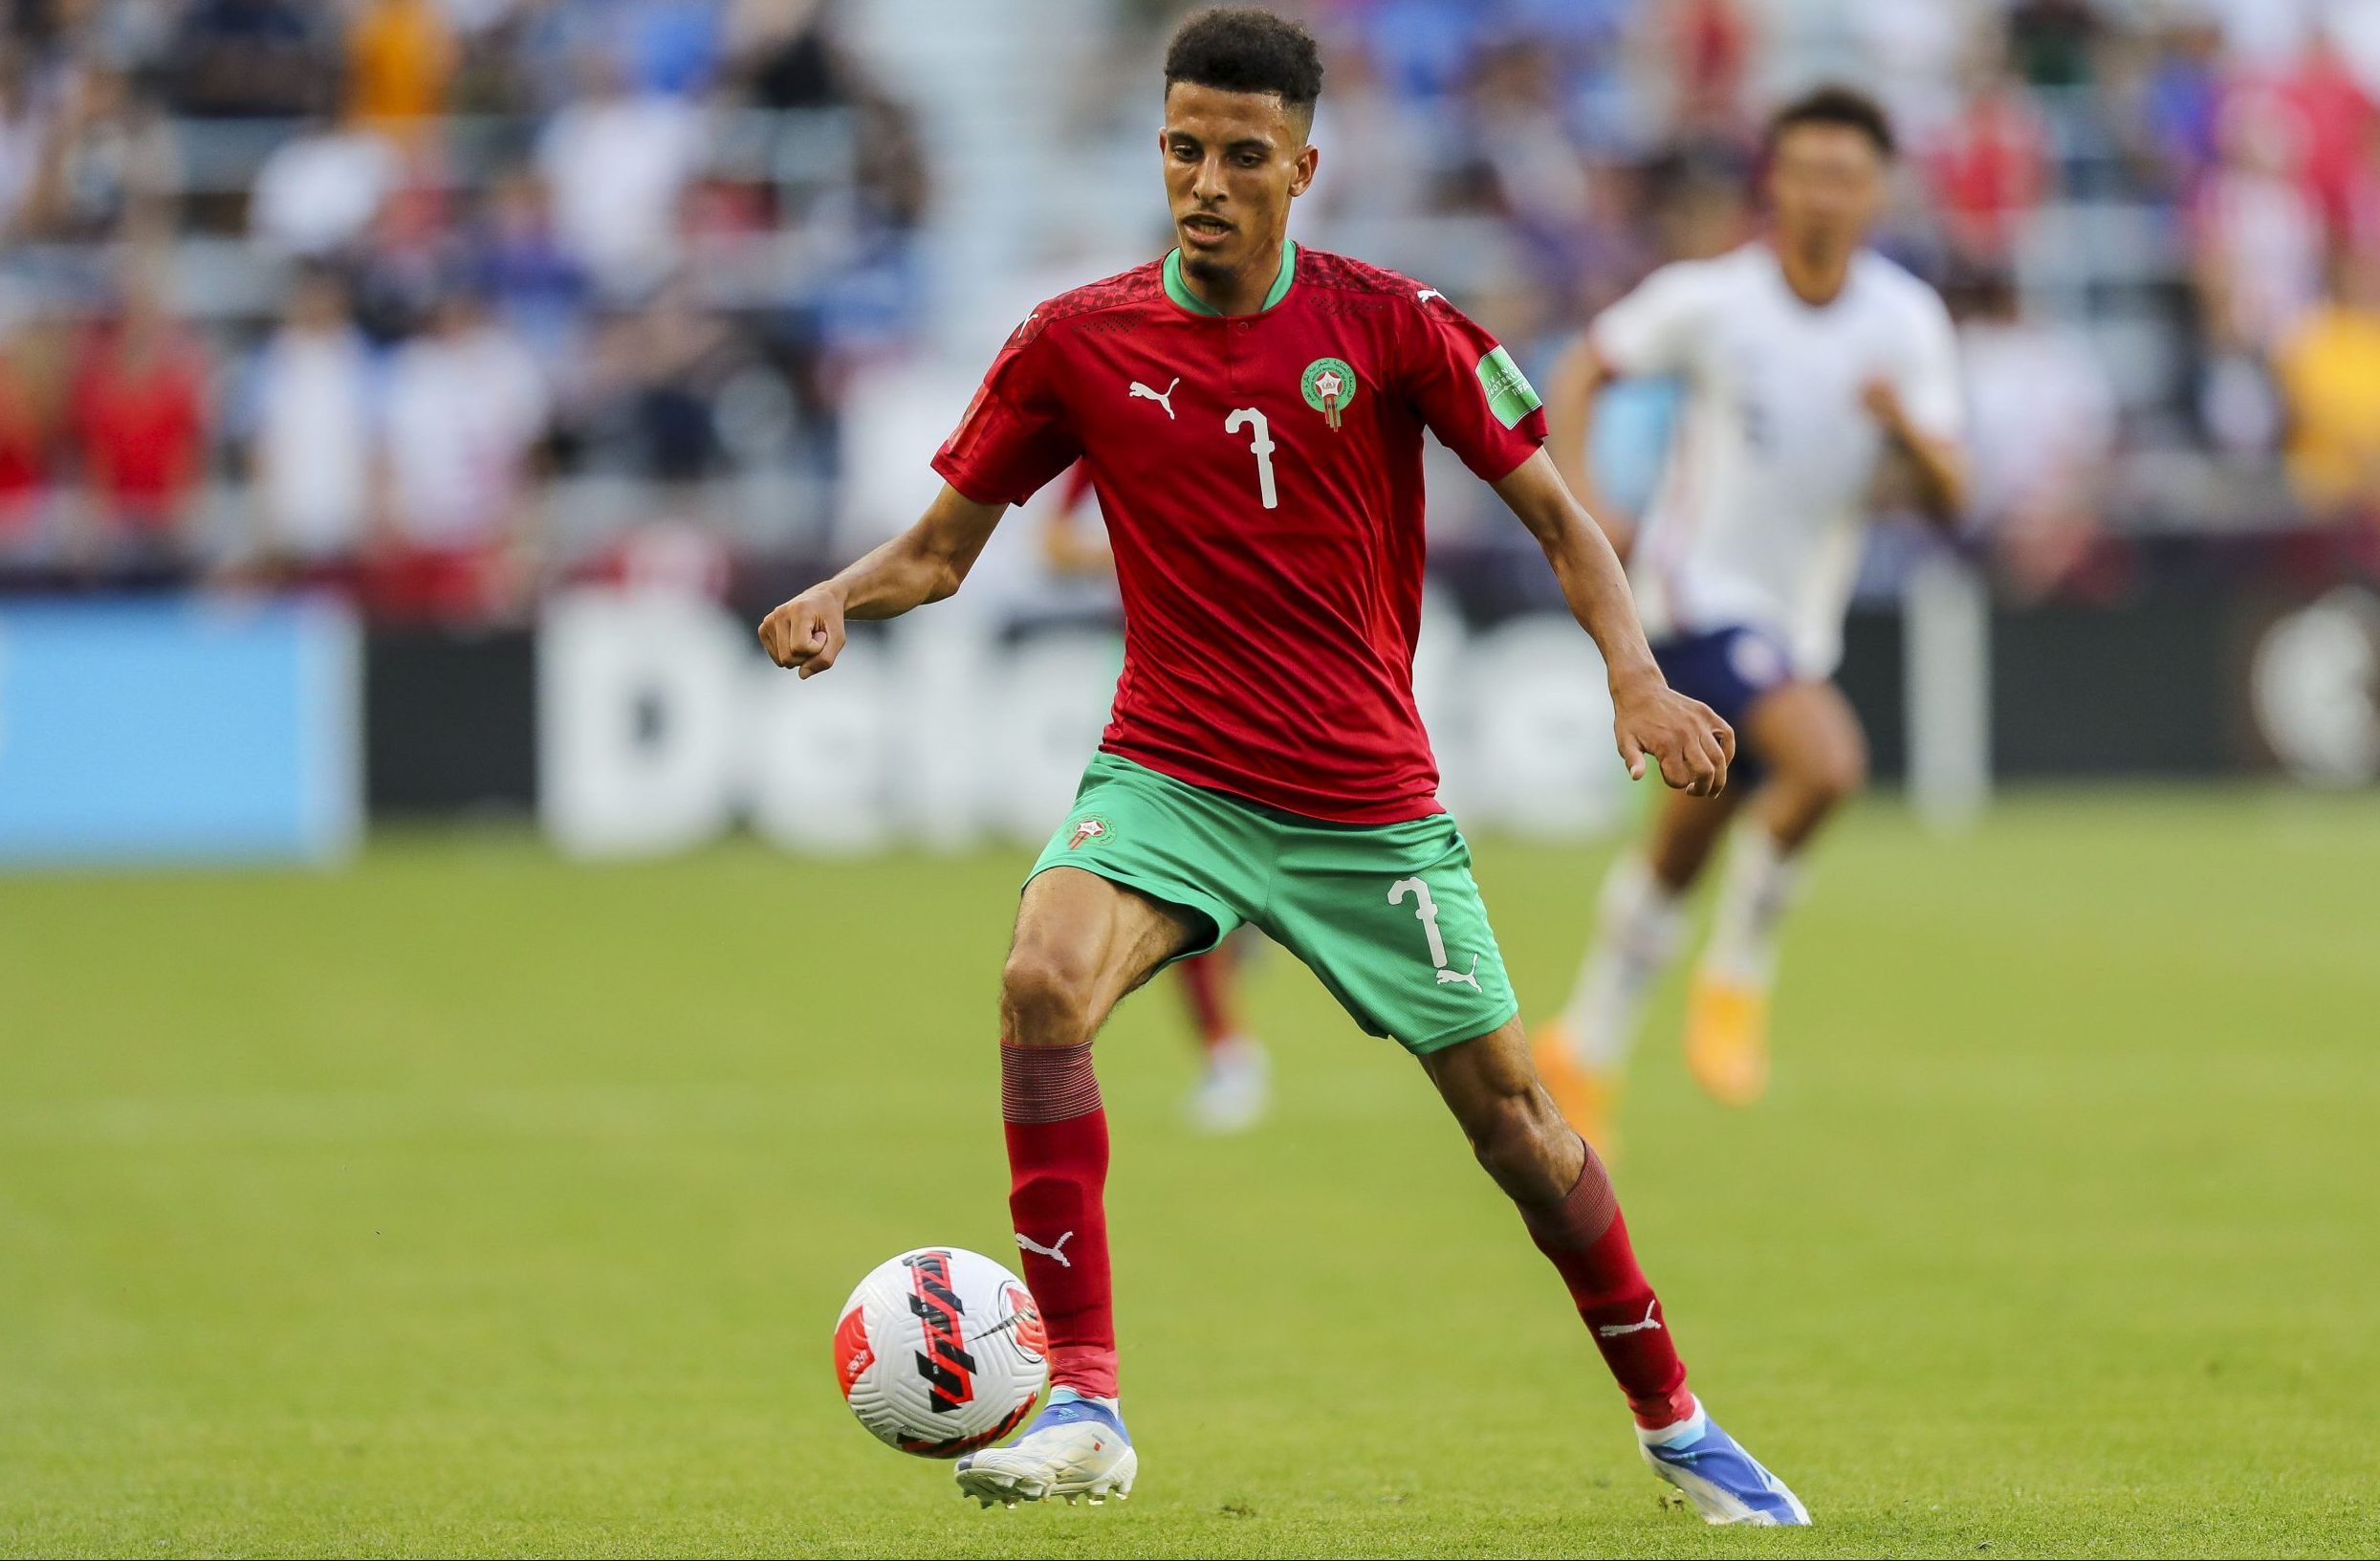 Morocco midfielder Azzedine Ounahi (7) dribbles against the United States in the first half during an International friendly soccer match